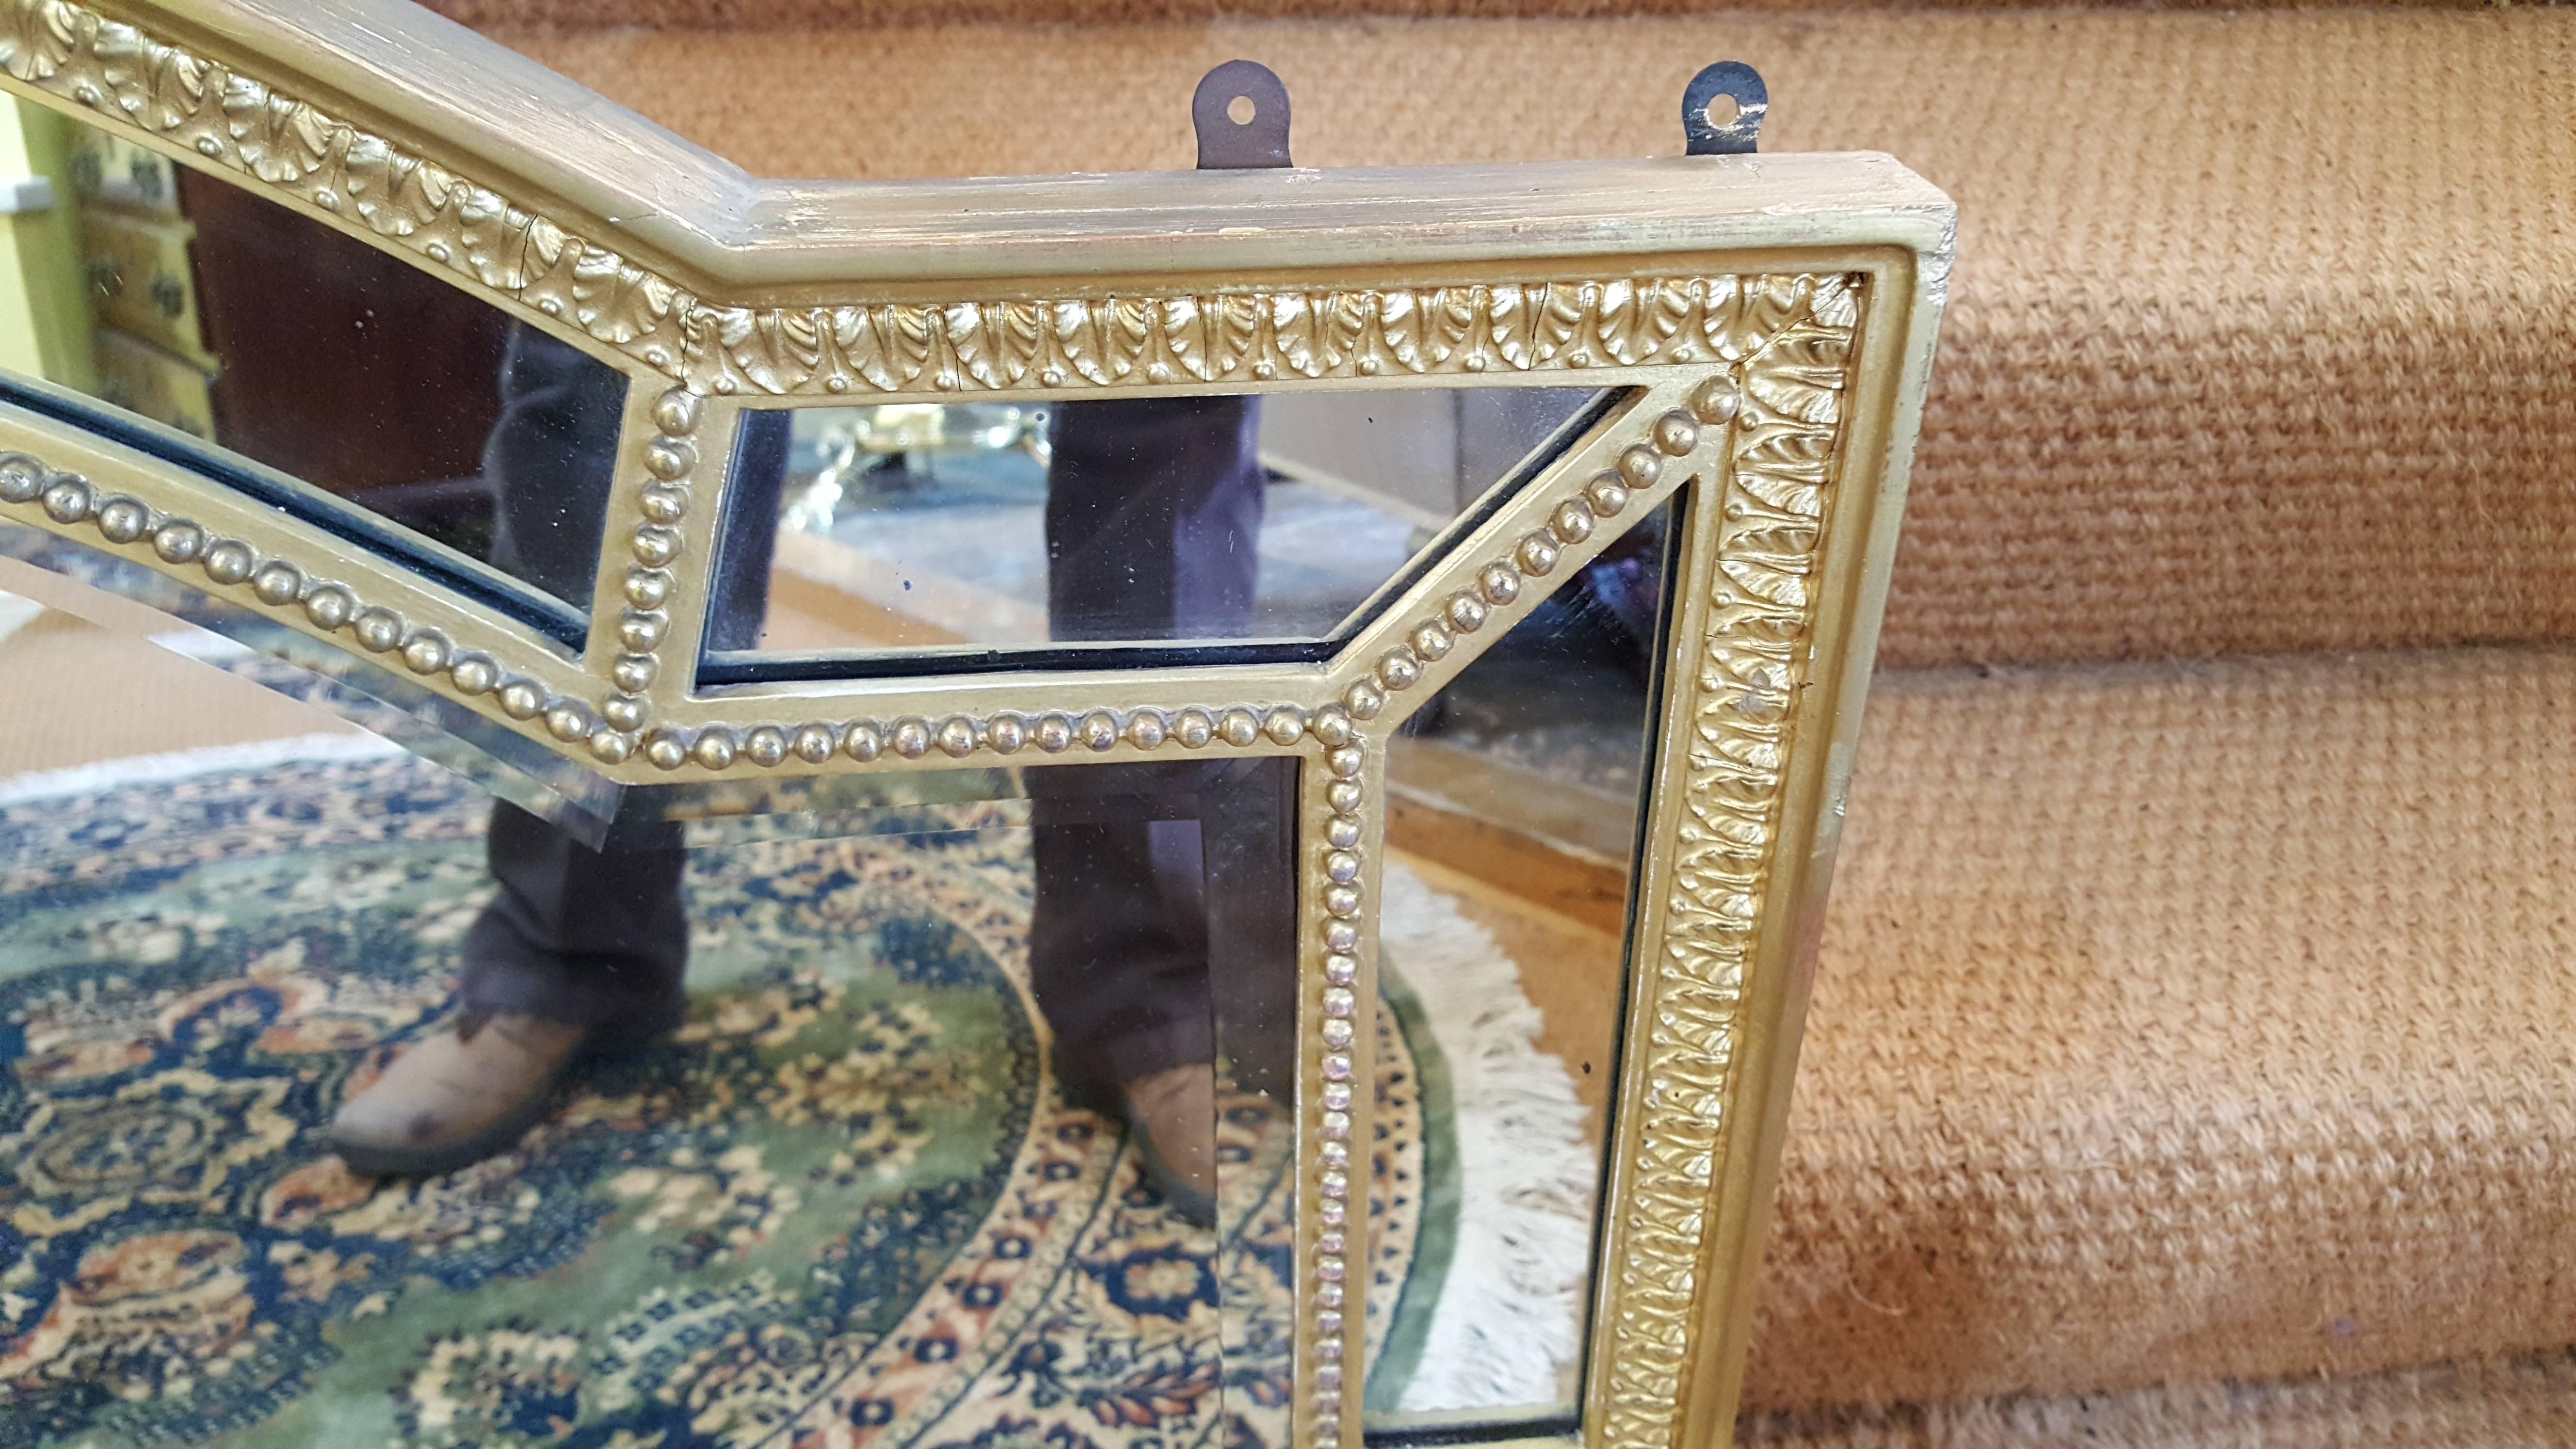 Edwardian giltwood mirror with double bevelled domed central plate framed by ten sectional mirrors
Measures: 41 1/2